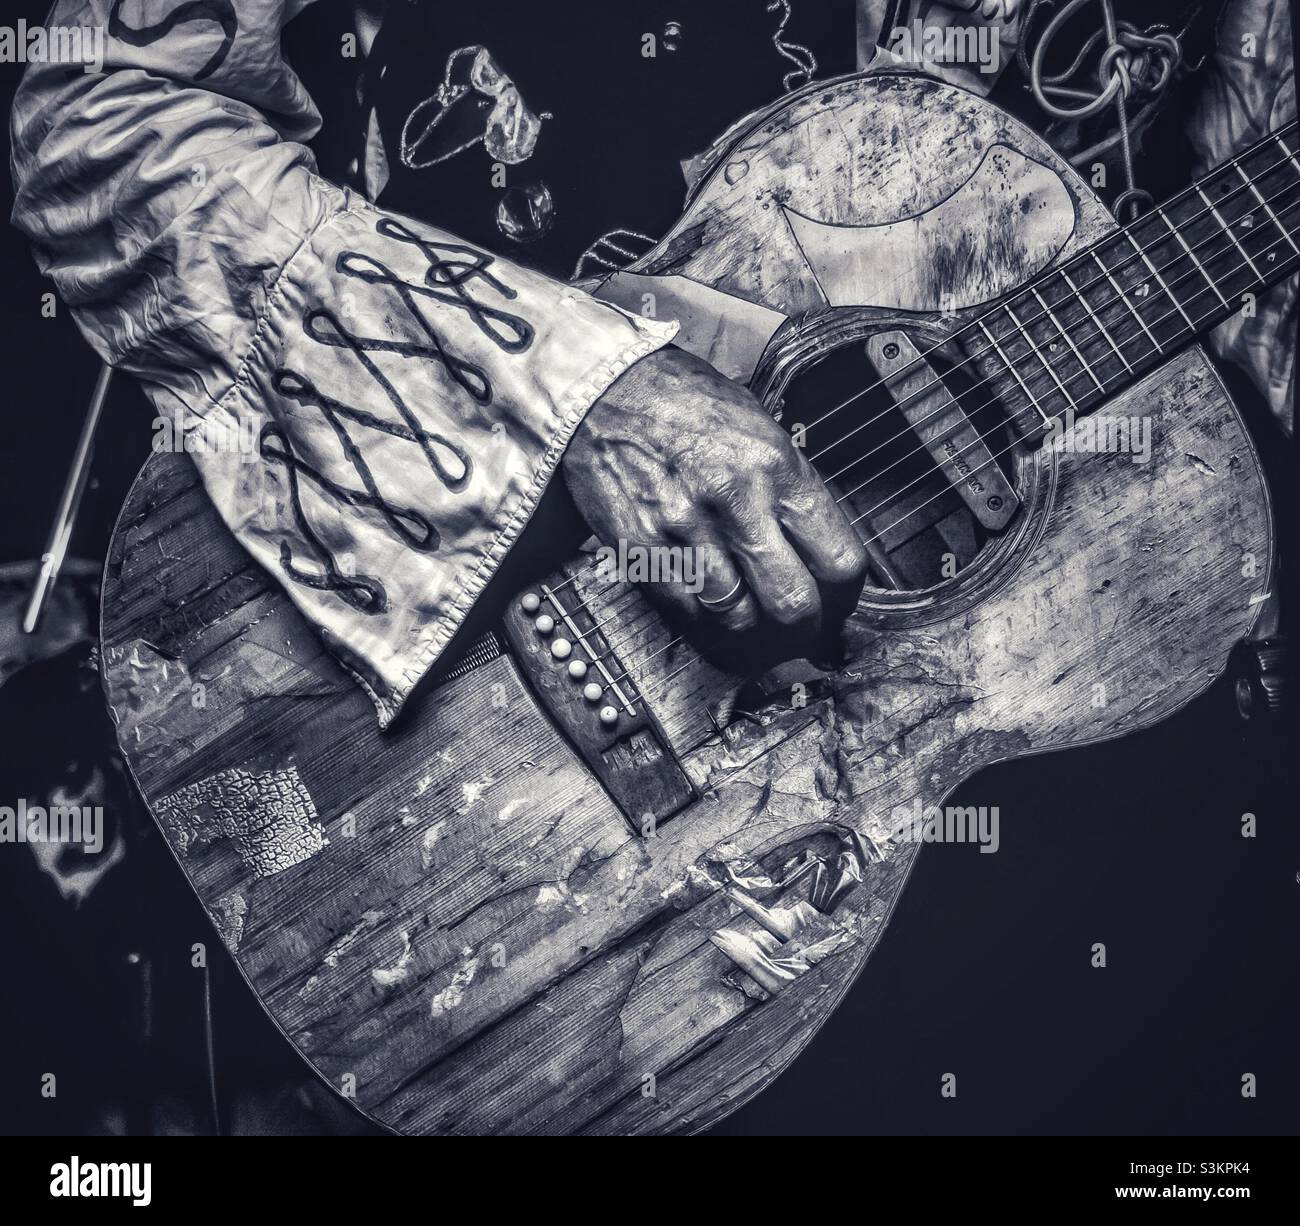 Ed Tudorpole plays his old, beat up acoustic guitar, close up of hand and  guitar in monochrome Stock Photo - Alamy